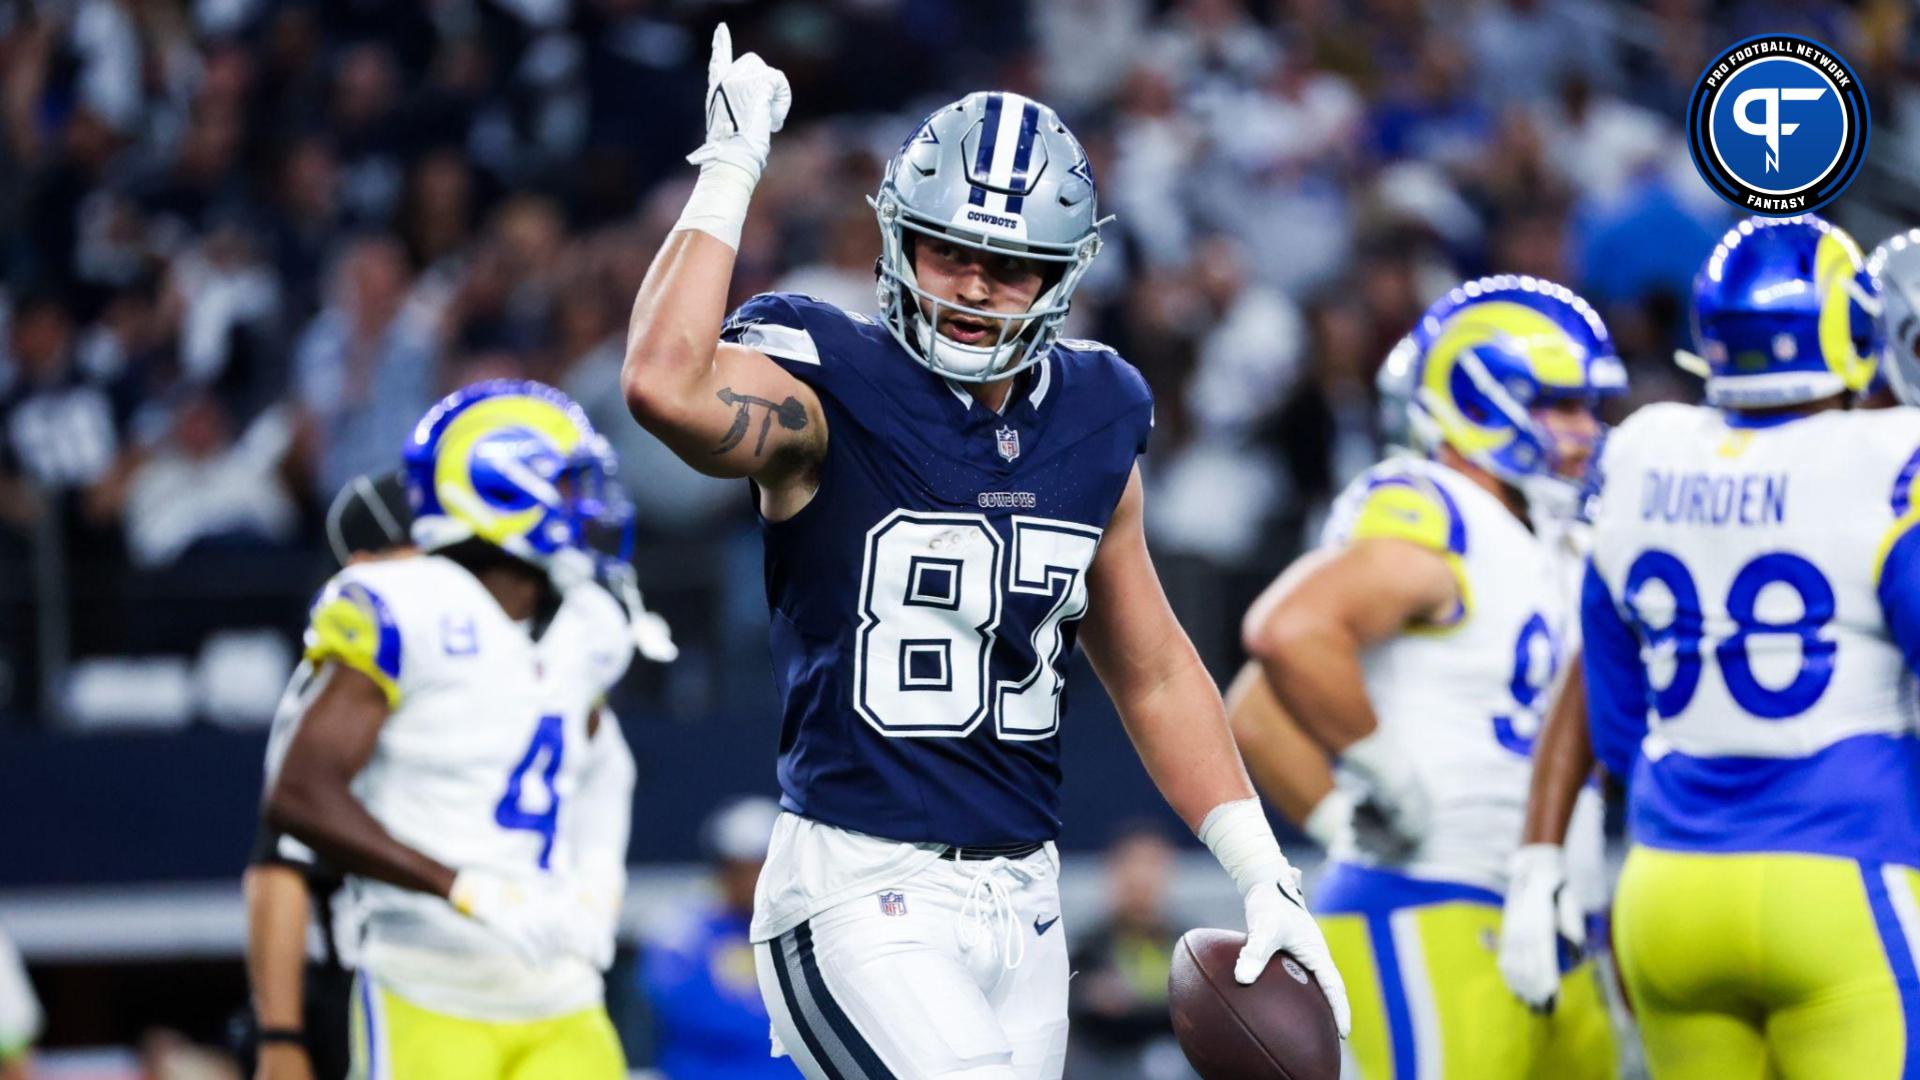 Jake Ferguson (87) celebrates after catching a touchdown pass during the first quarter against the Los Angeles Rams at AT&T Stadium.